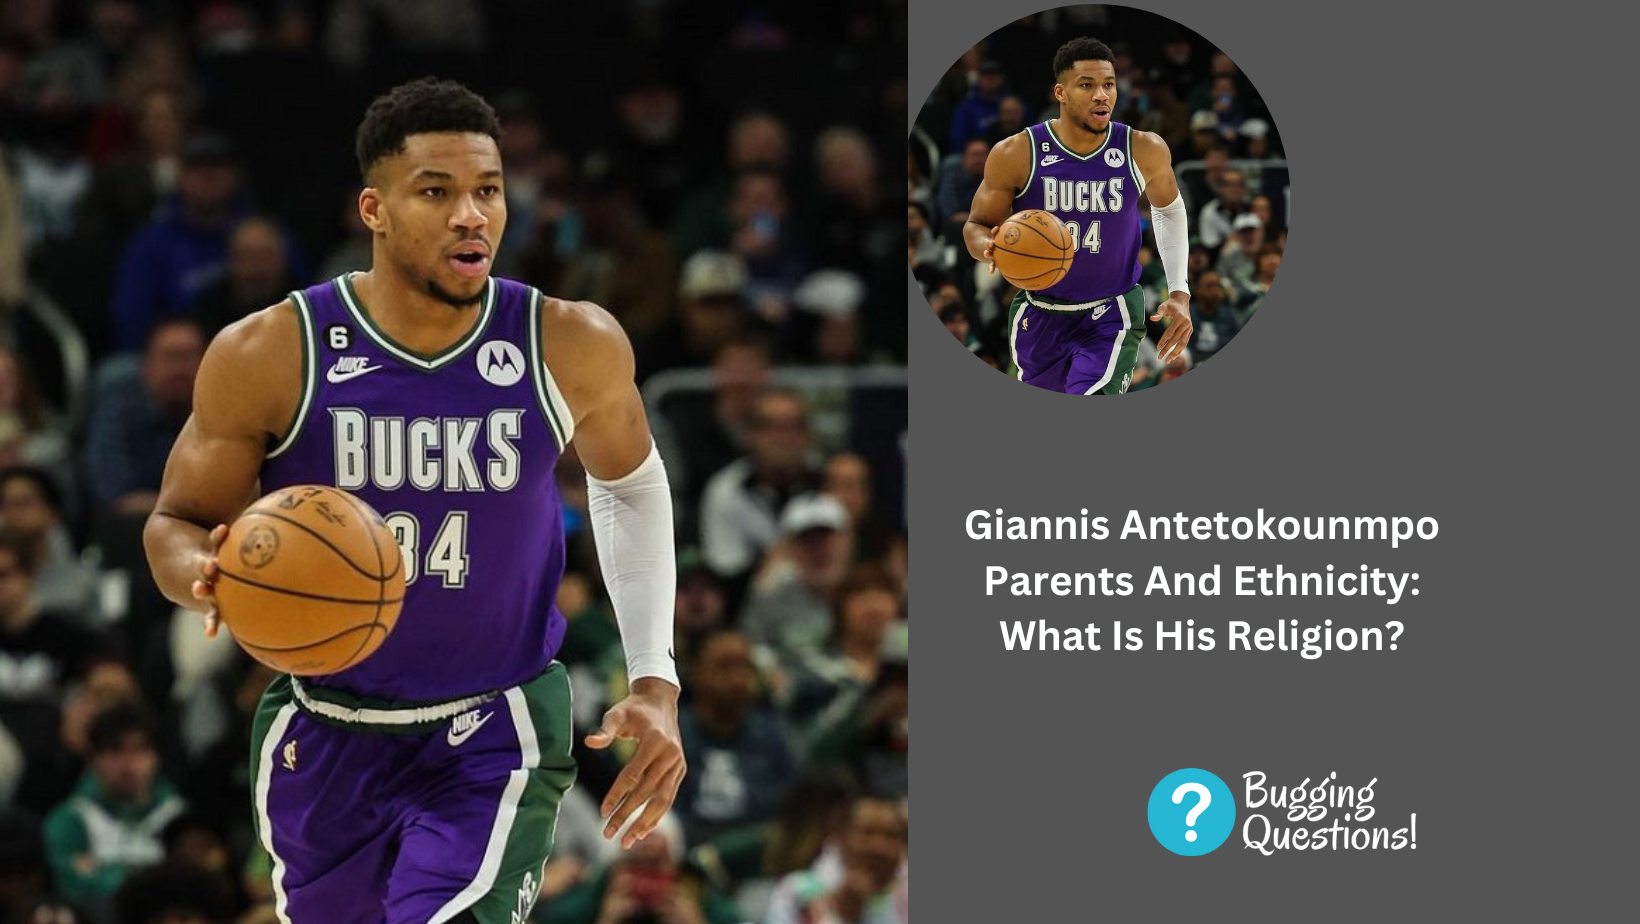 Giannis Antetokounmpo Parents And Ethnicity: What Is His Religion?